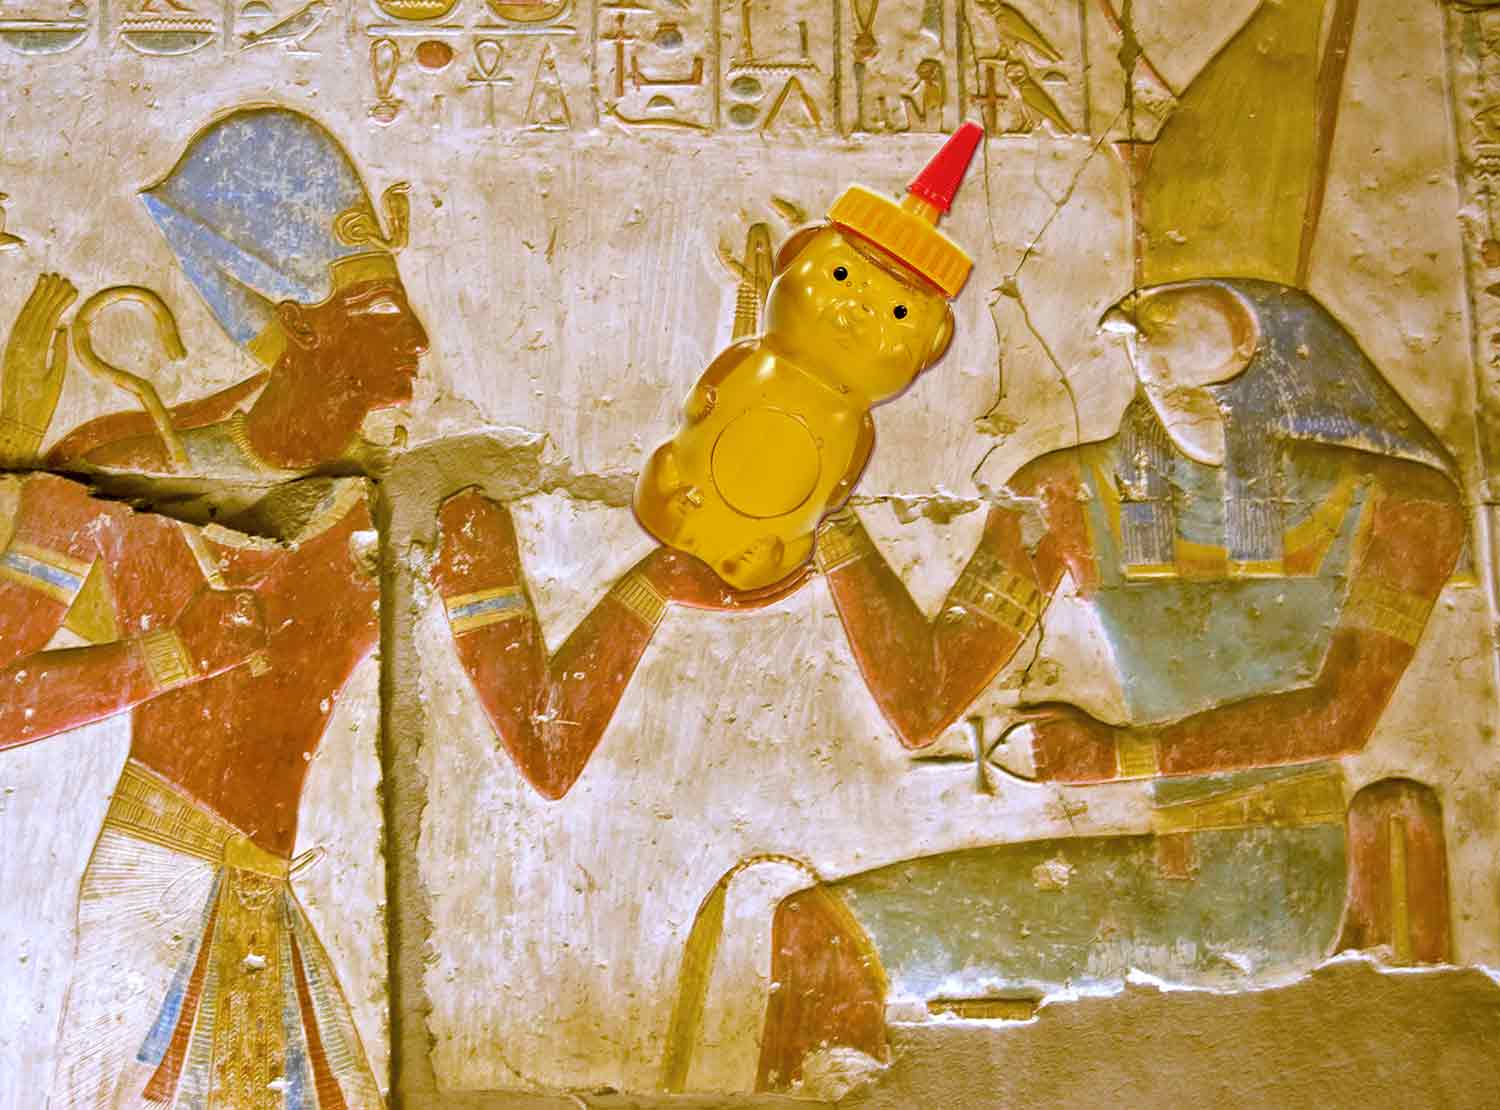 A bear-shaped container of honey superimposed on a carving of an ancient Egyptian pharoah and another person.